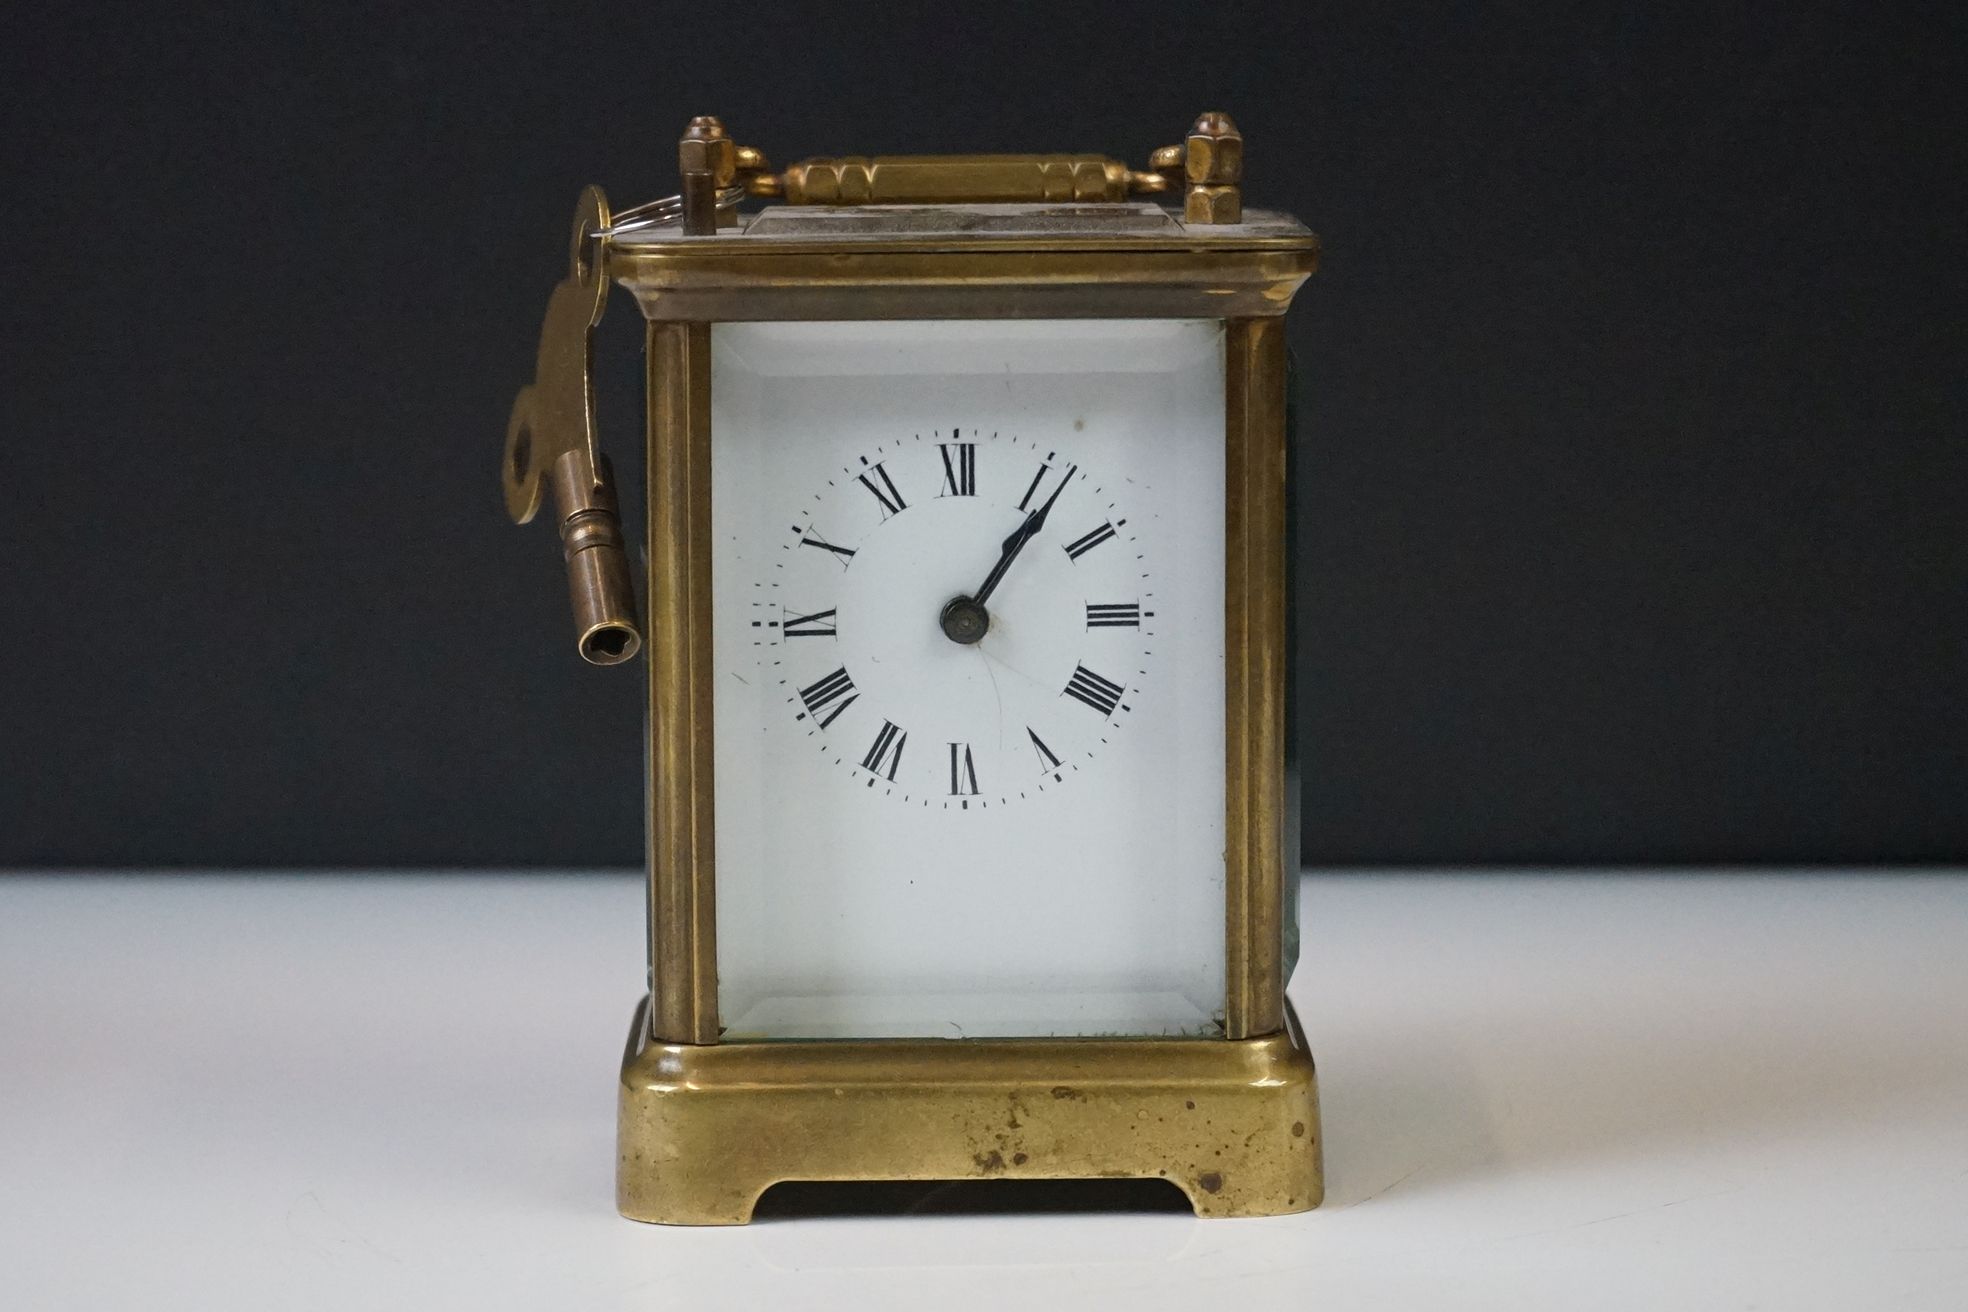 A brass cased carriage clock with beveled glass panels and white enamel dial, complete with key.